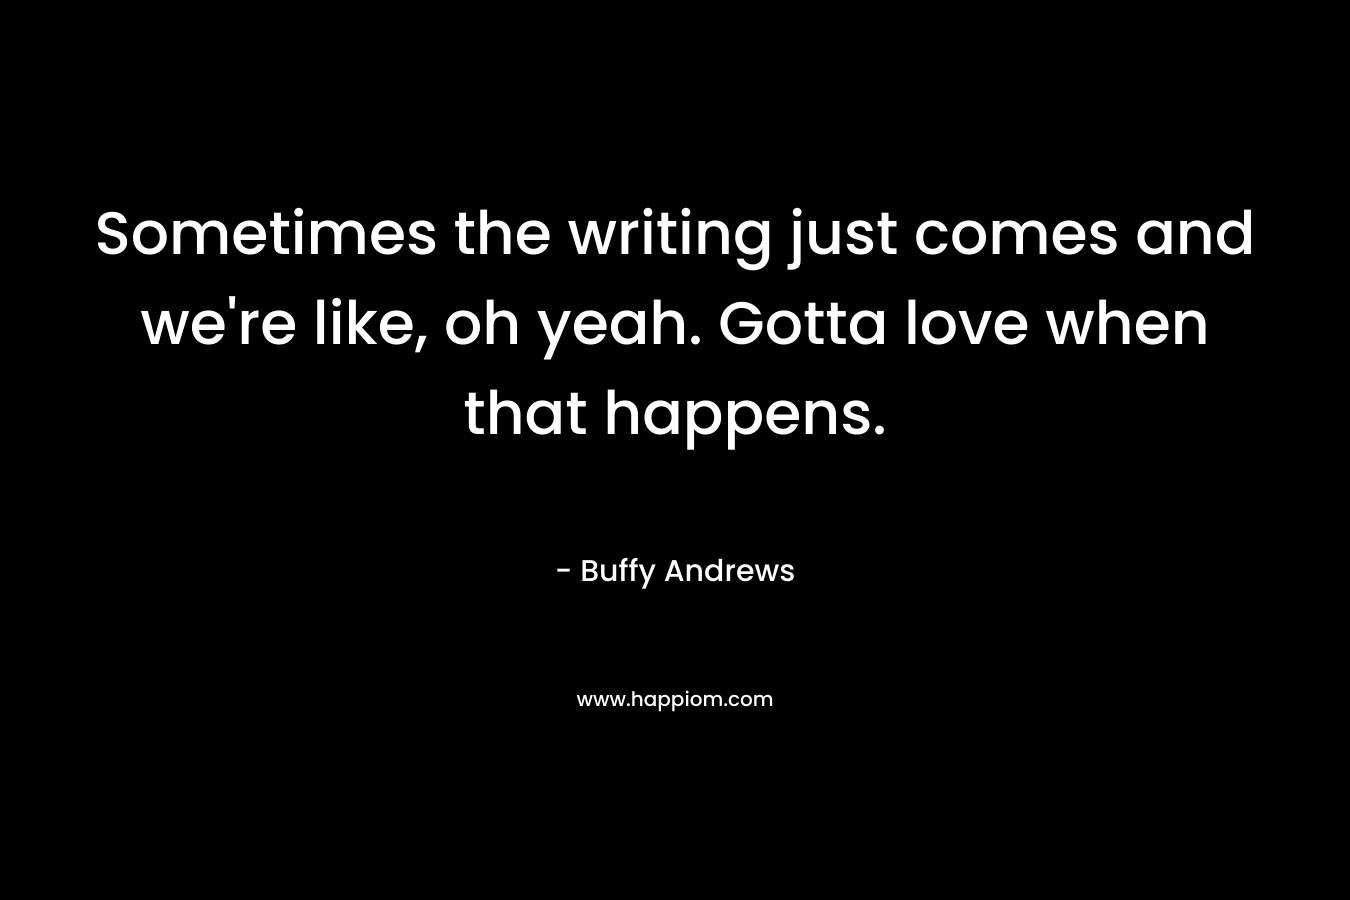 Sometimes the writing just comes and we’re like, oh yeah. Gotta love when that happens. – Buffy Andrews